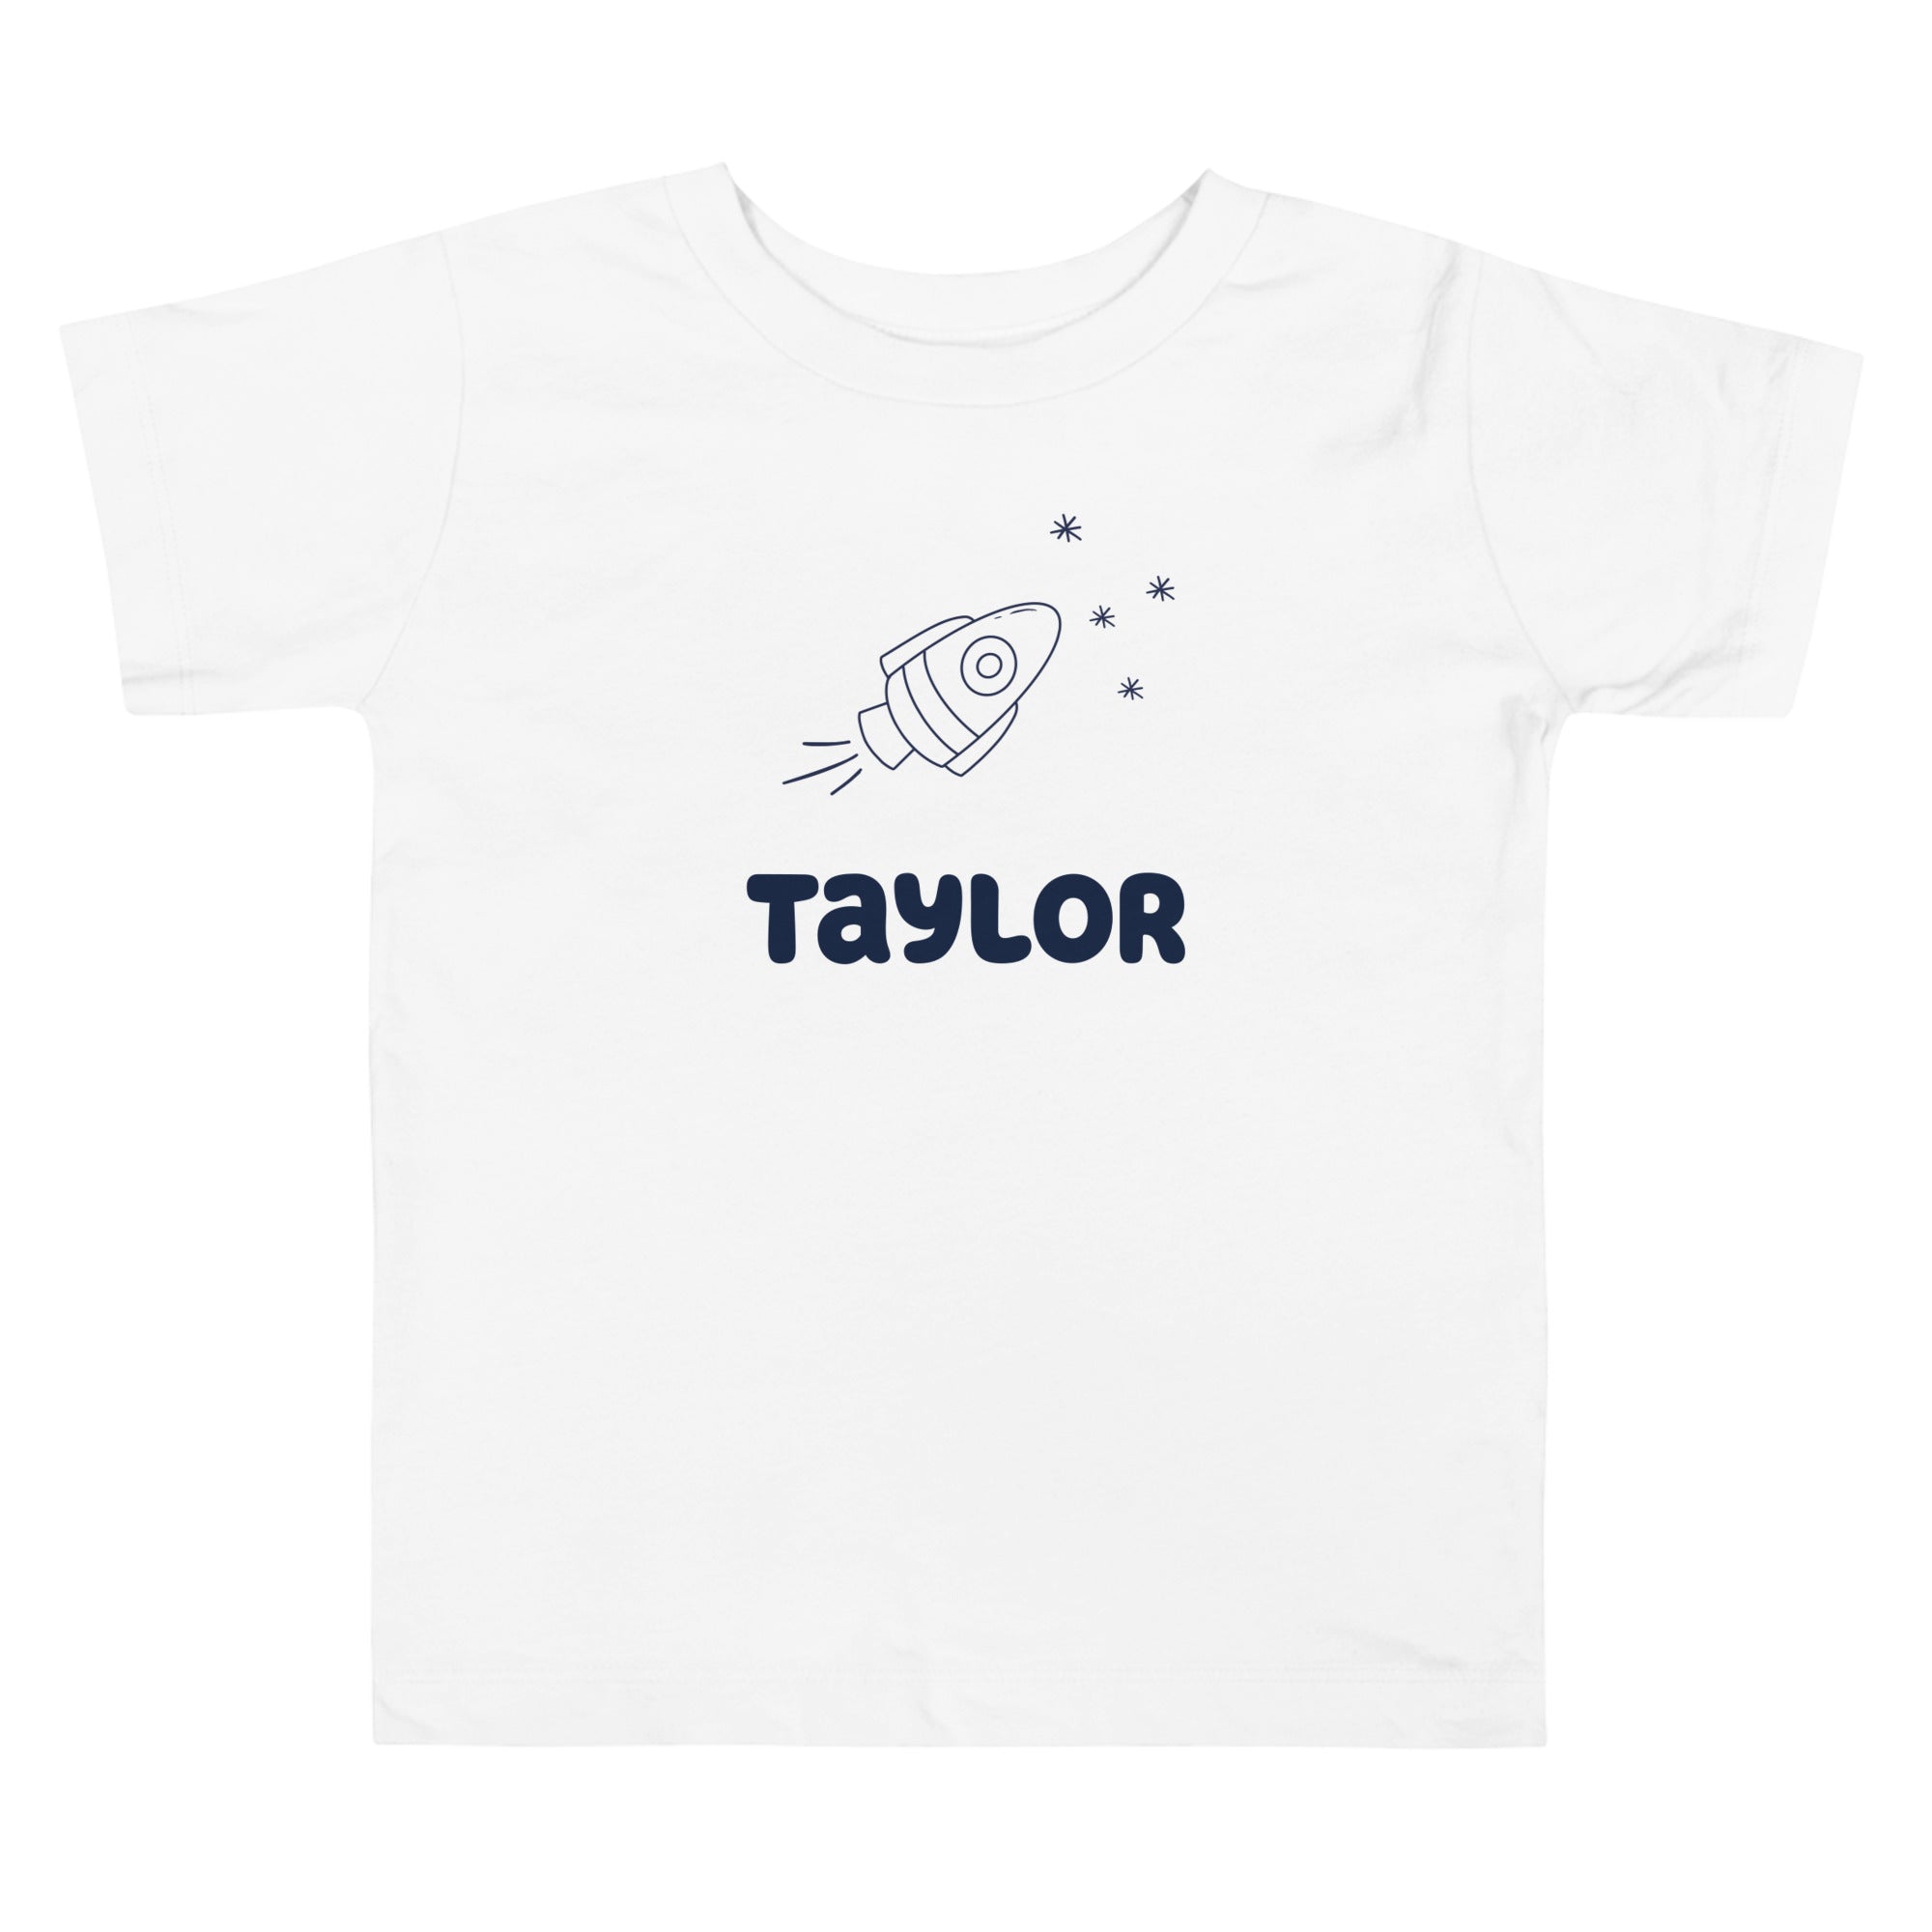 Personalized kids shirt with a rocket ship